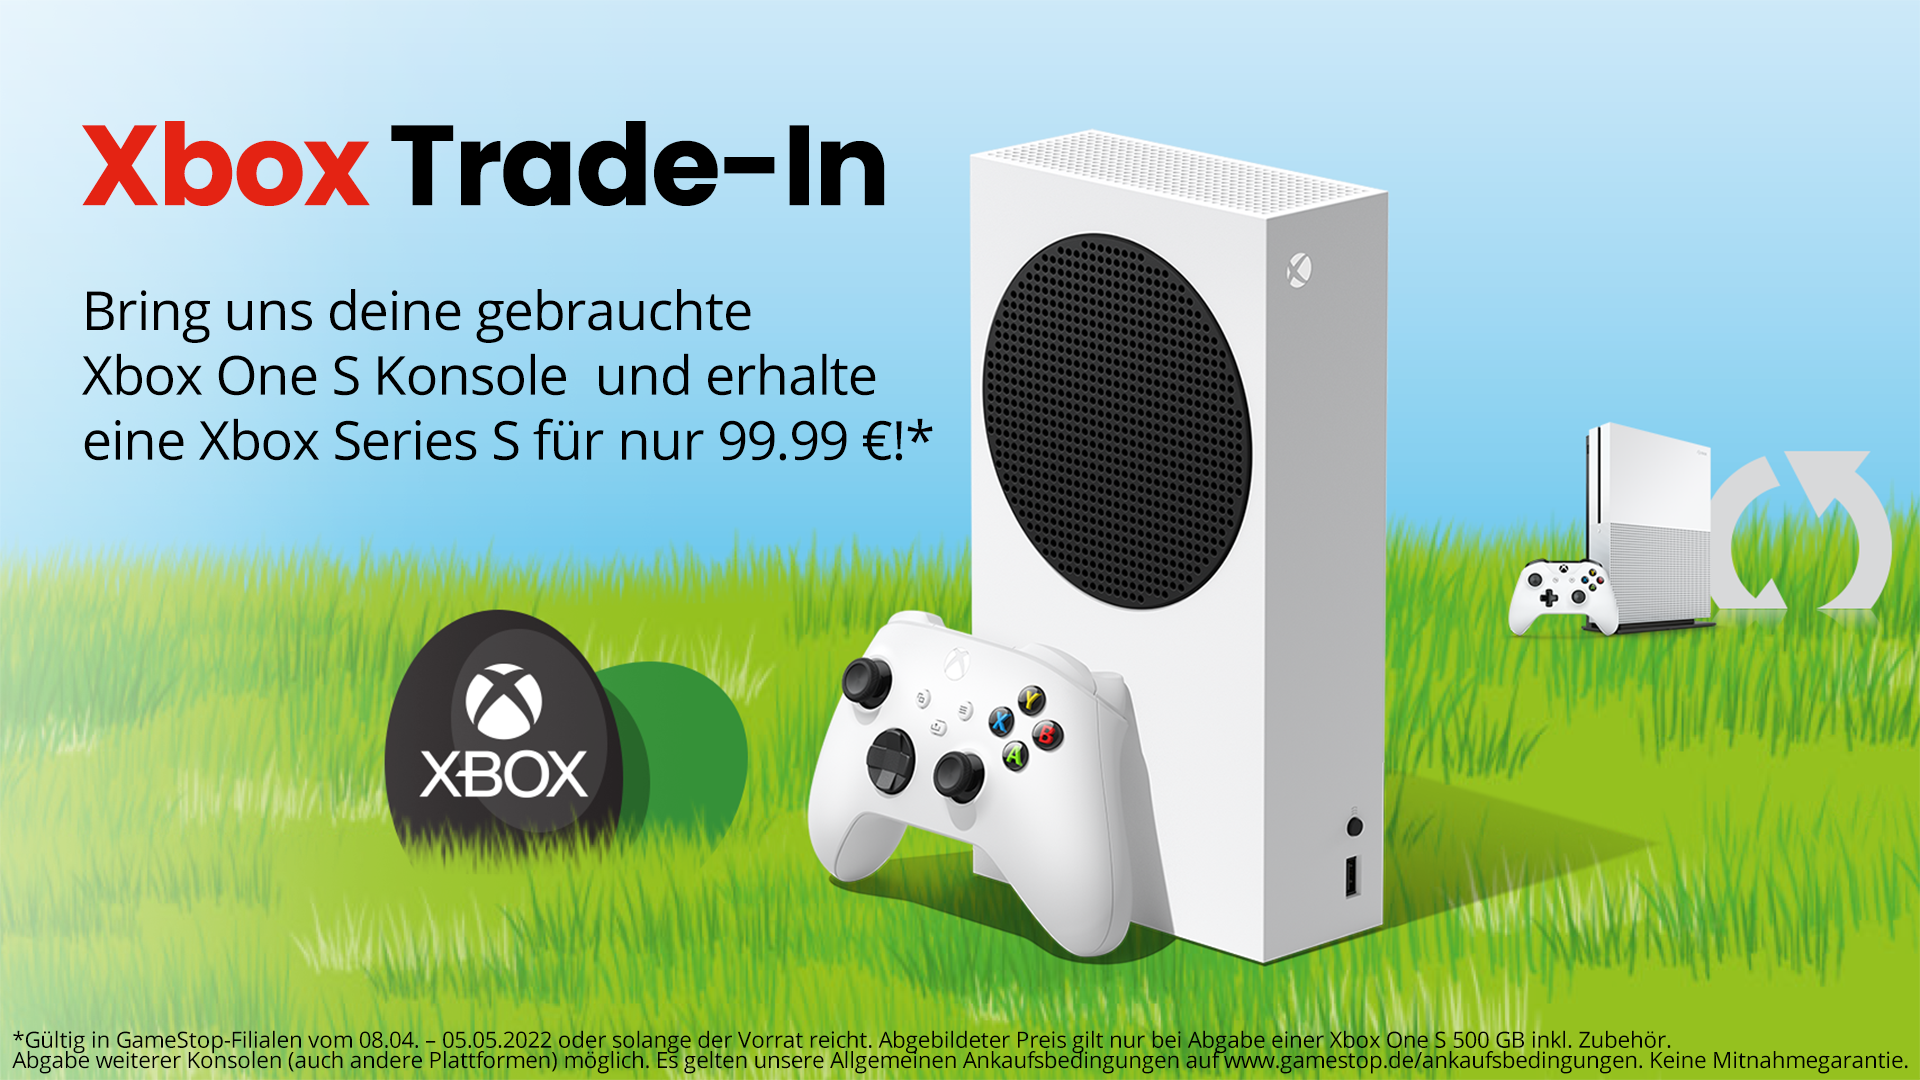 grind Treble Kwijtschelding Microsoft Announces New Strategy To Get More Xbox Sales In Germany